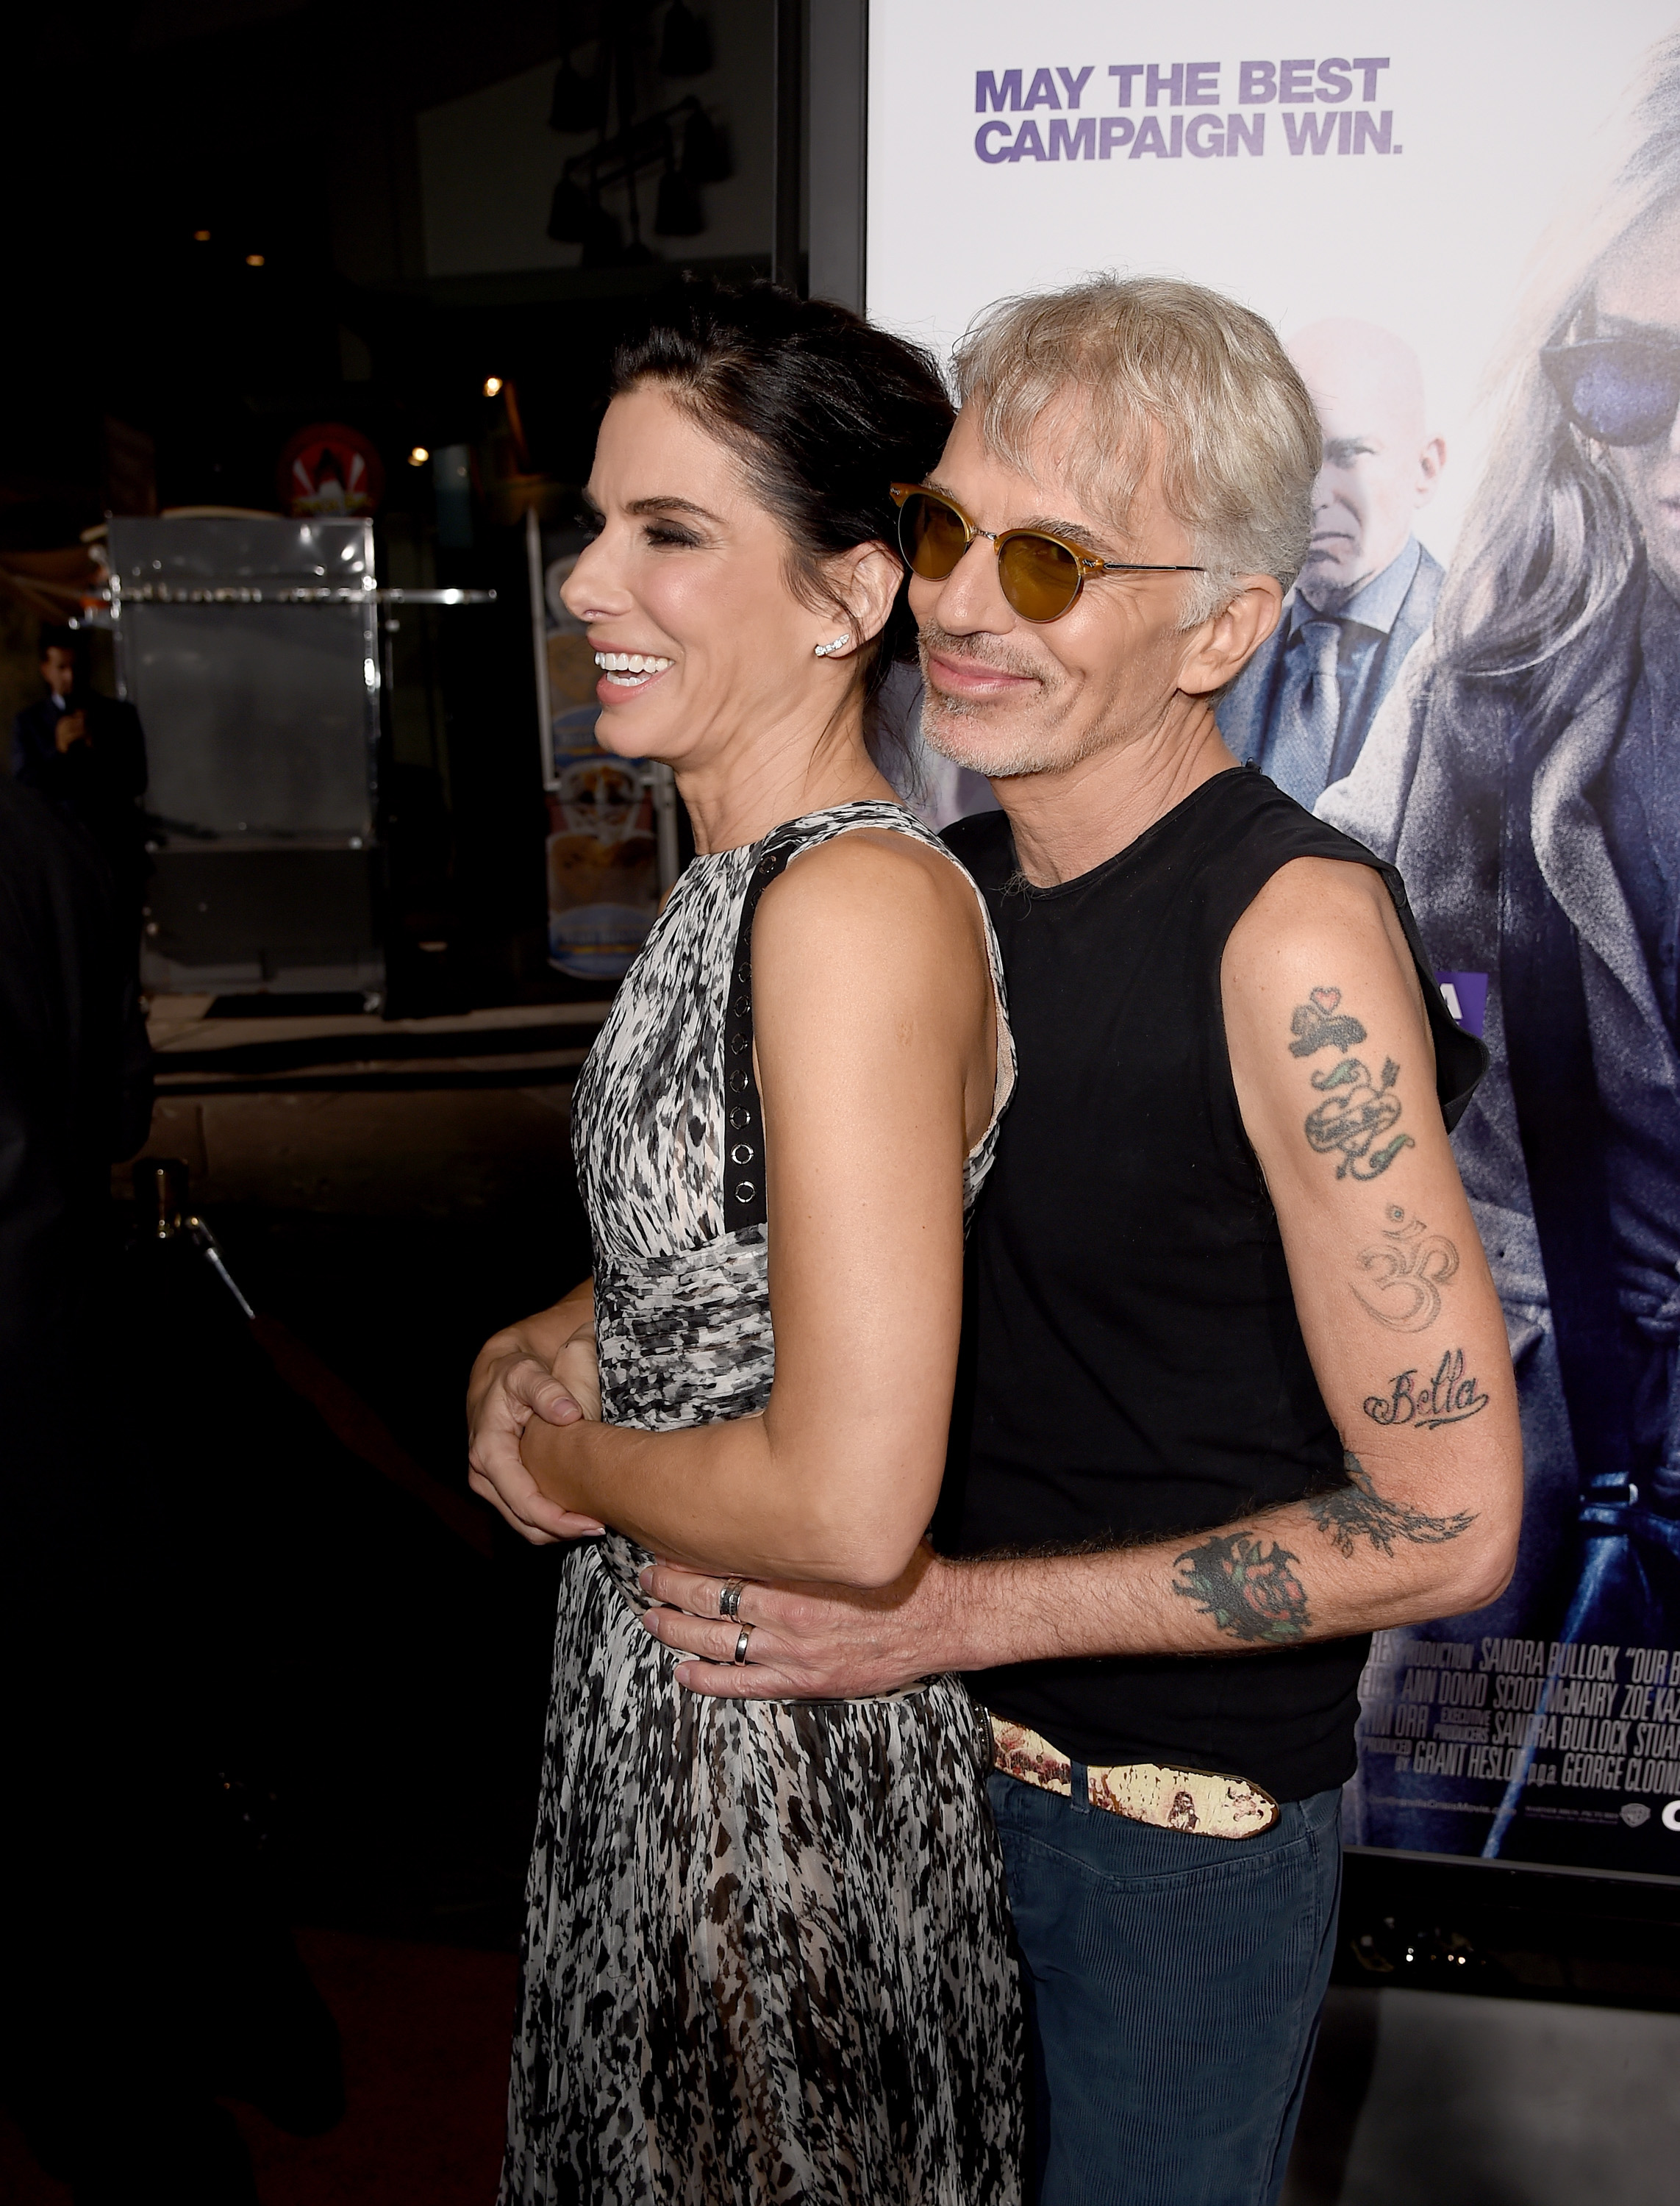 Sandra Bullock and Billy Bob Thornton attend the premiere of "Our Brand Is Crisis" on Oct. 26, 2015 in Hollywood, Ca. (Kevin Winter—Getty Images)